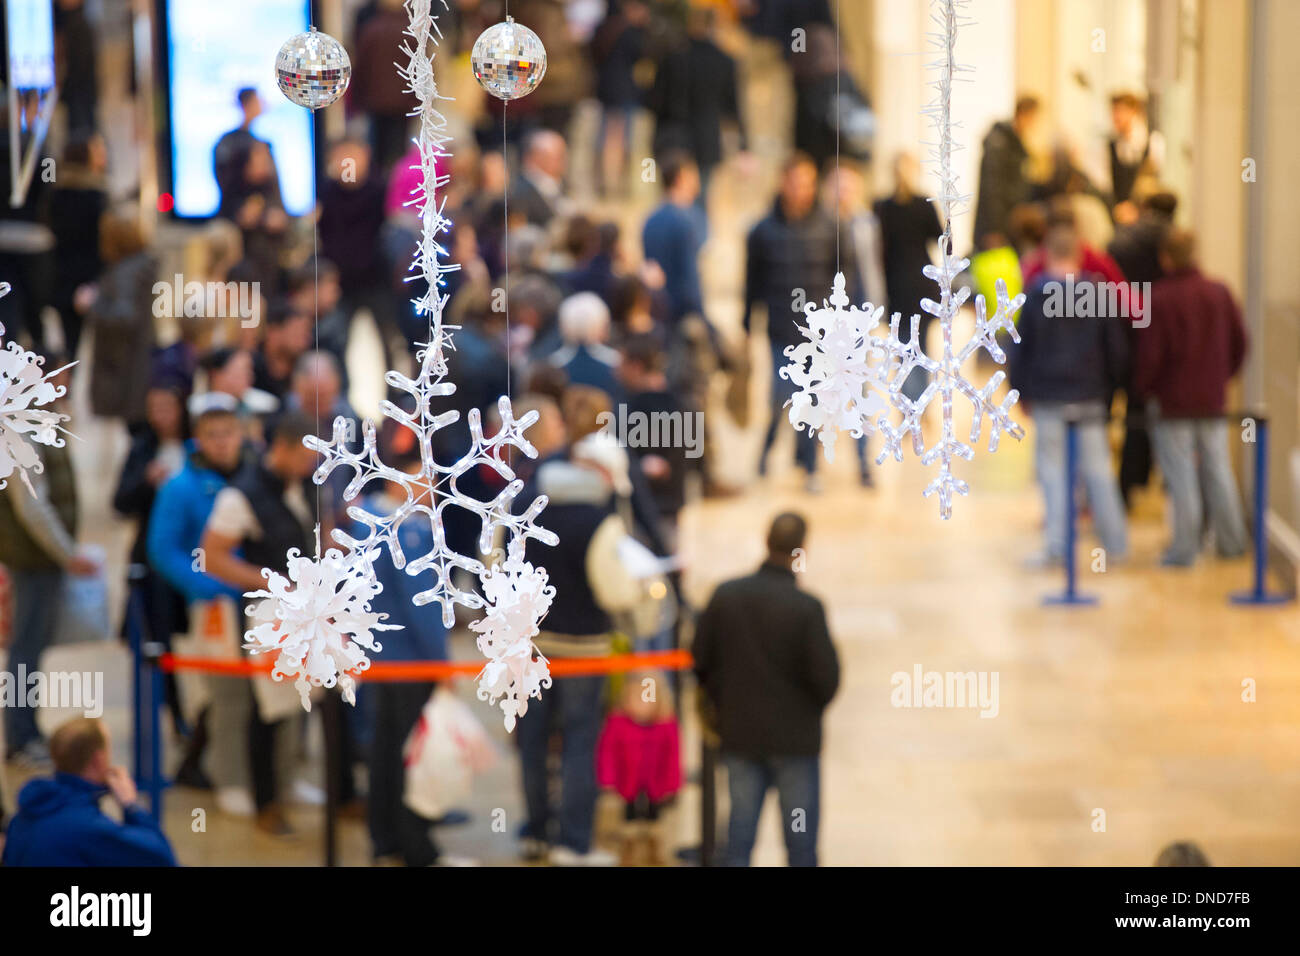 Cardiff, Wales, UK. December 23. Christmas shoppers brave bad weather on Mega Monday to go shopping for last minute presents on December 23 in St David's Arcade, Cardiff, Wales. Shoppers are expected to spend £12 billion in four days. Some shops have already started their sales. (Photo by Matthew Horwood/Alamy Live News) Stock Photo